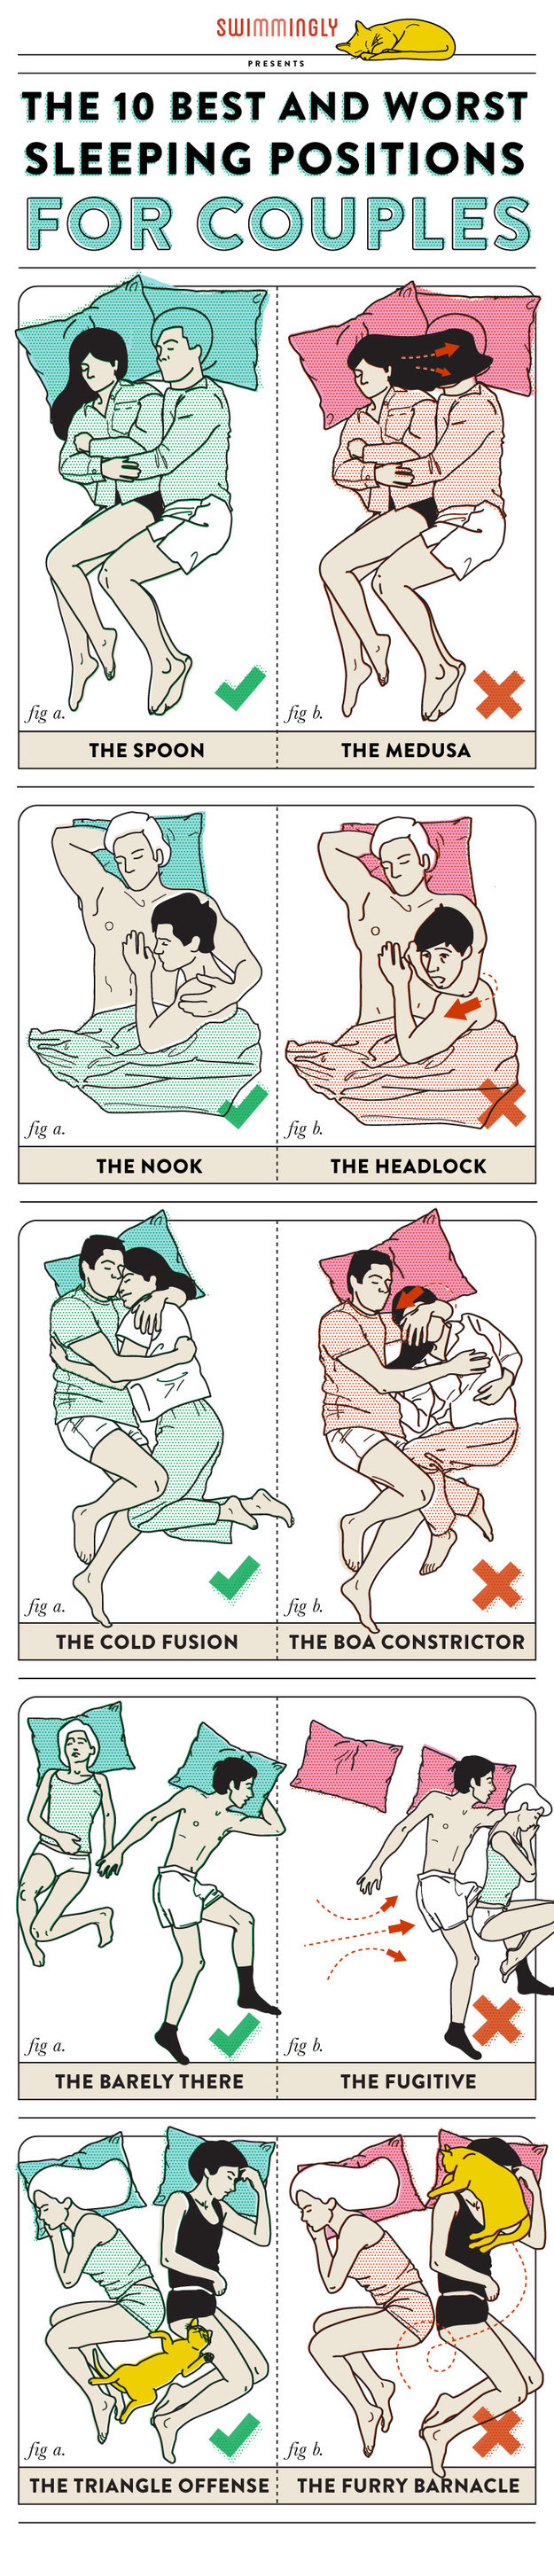 For sleeping with bae (and actually sleeping).